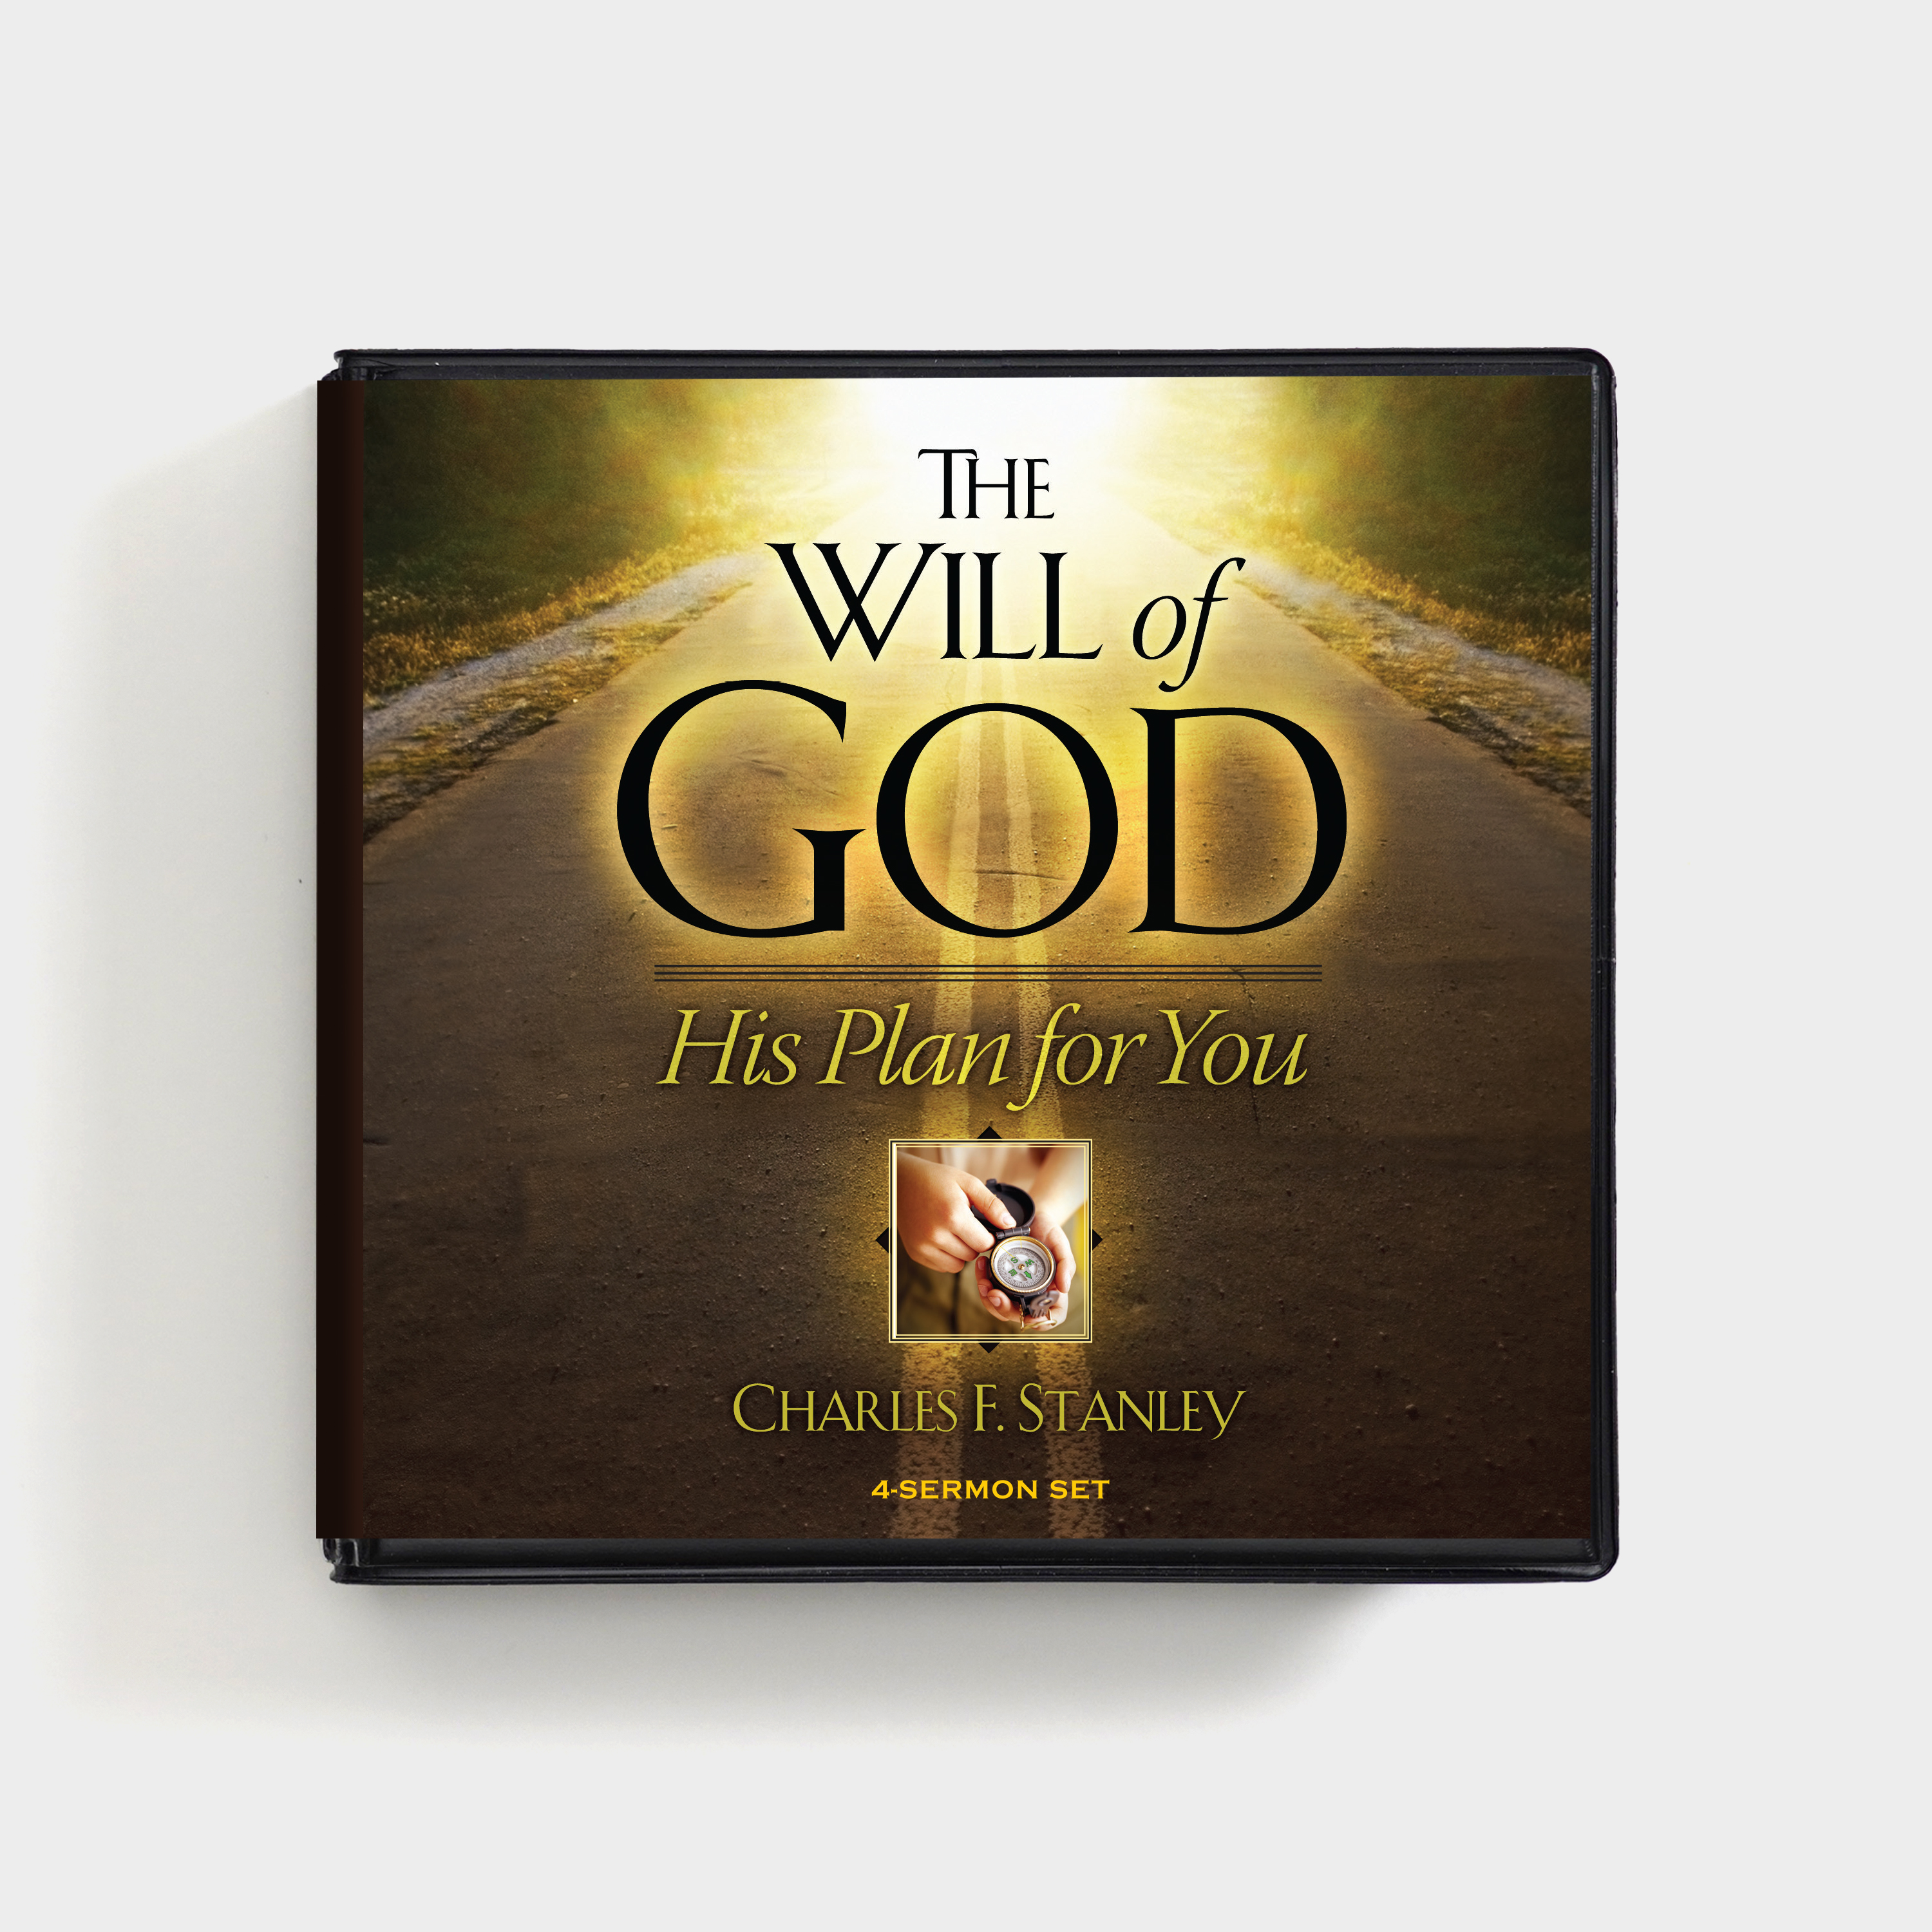 The Will of God: His Plan for You